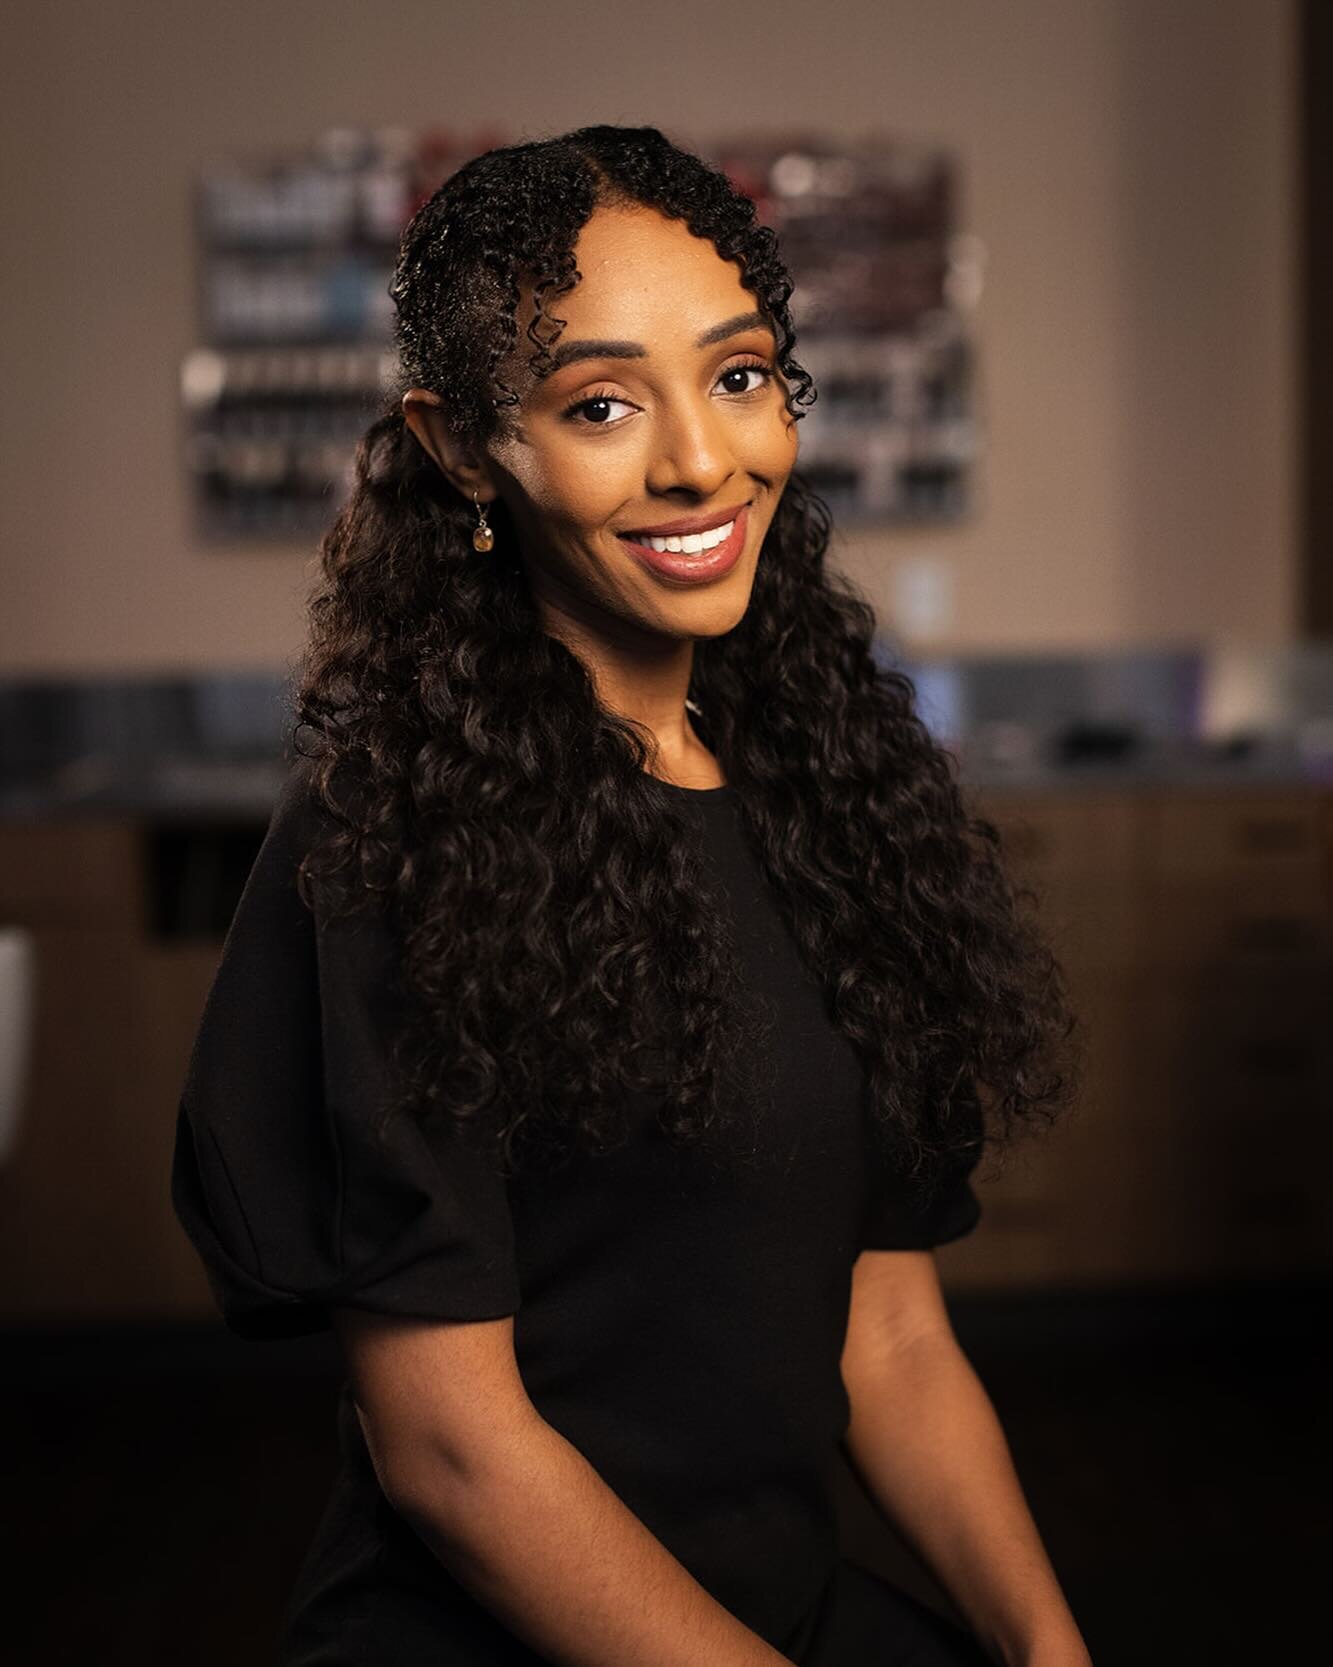 Meet Winta! @peachrefresh Winta expertly cares for scalp and hair with her impressive knowledge of botanical ingredients and their active properties. Whether you maintaining the hair you love or would like to try something new she will care for each 